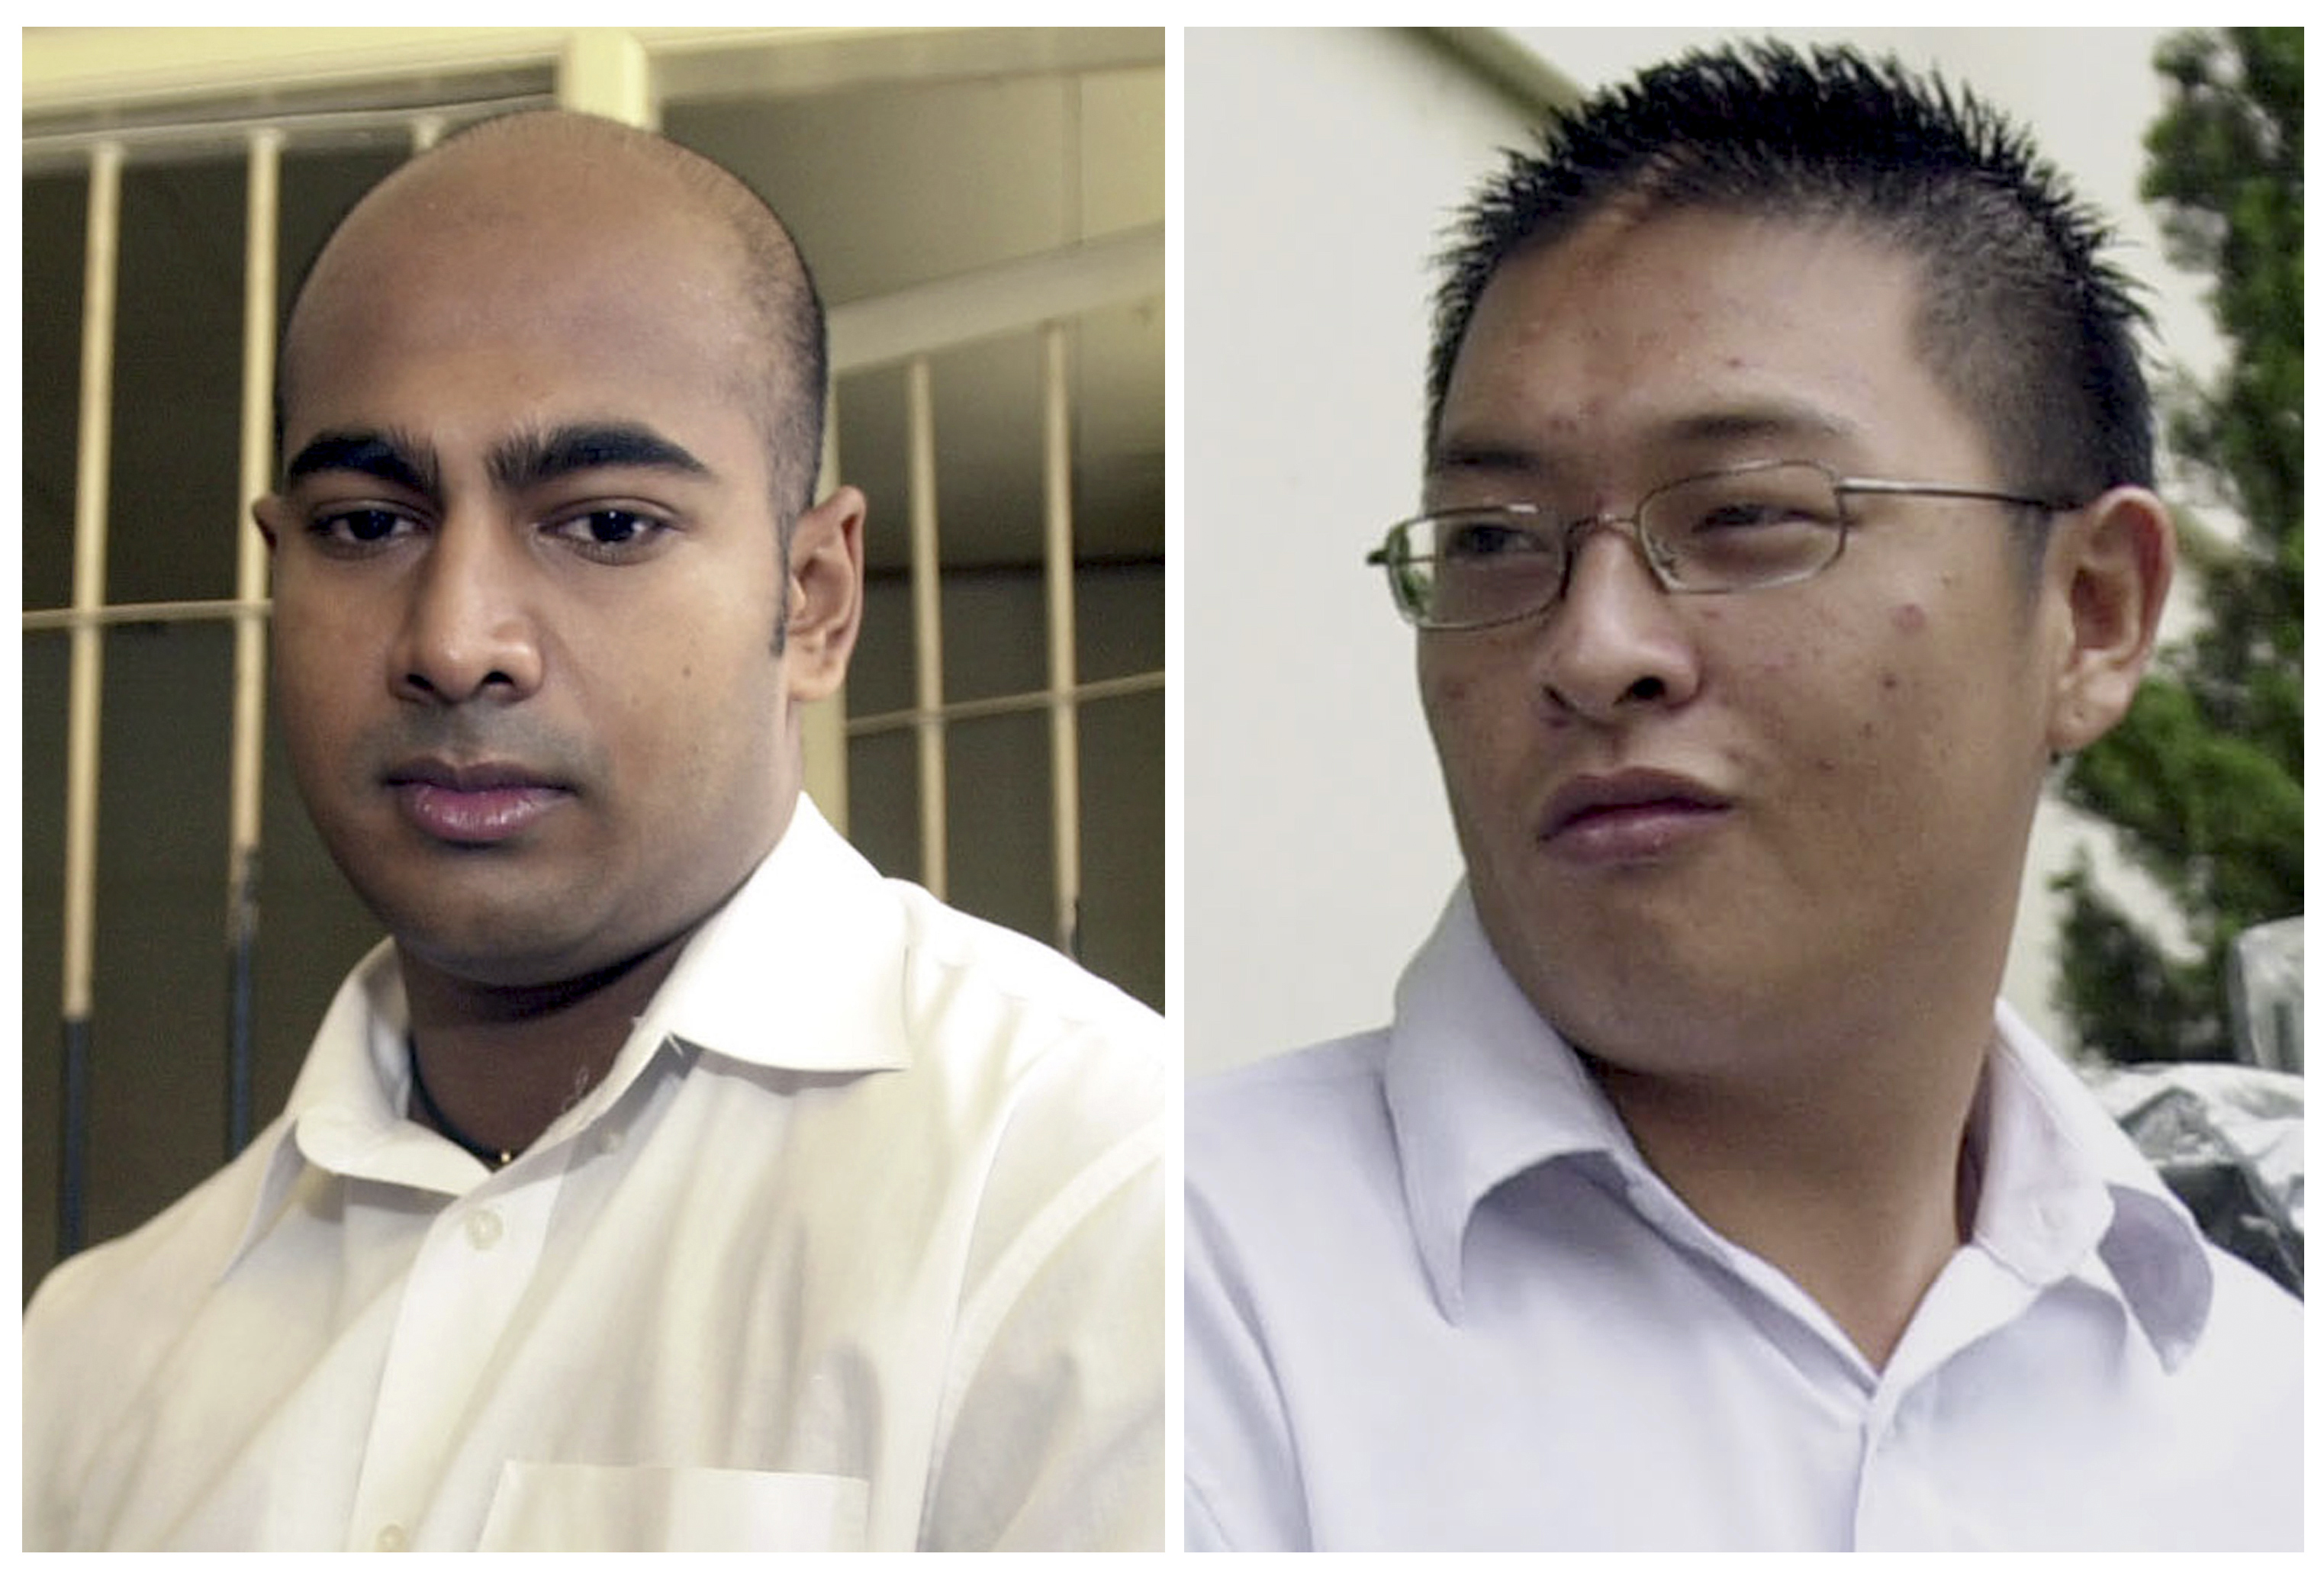 This combination of two file photos from Jan. 24, 2006, left, and Jan. 26, 2006 shows Australian drug traffickers Myuran Sukumaran, left, and Andrew Chan during their trial in Bali, Indonesia